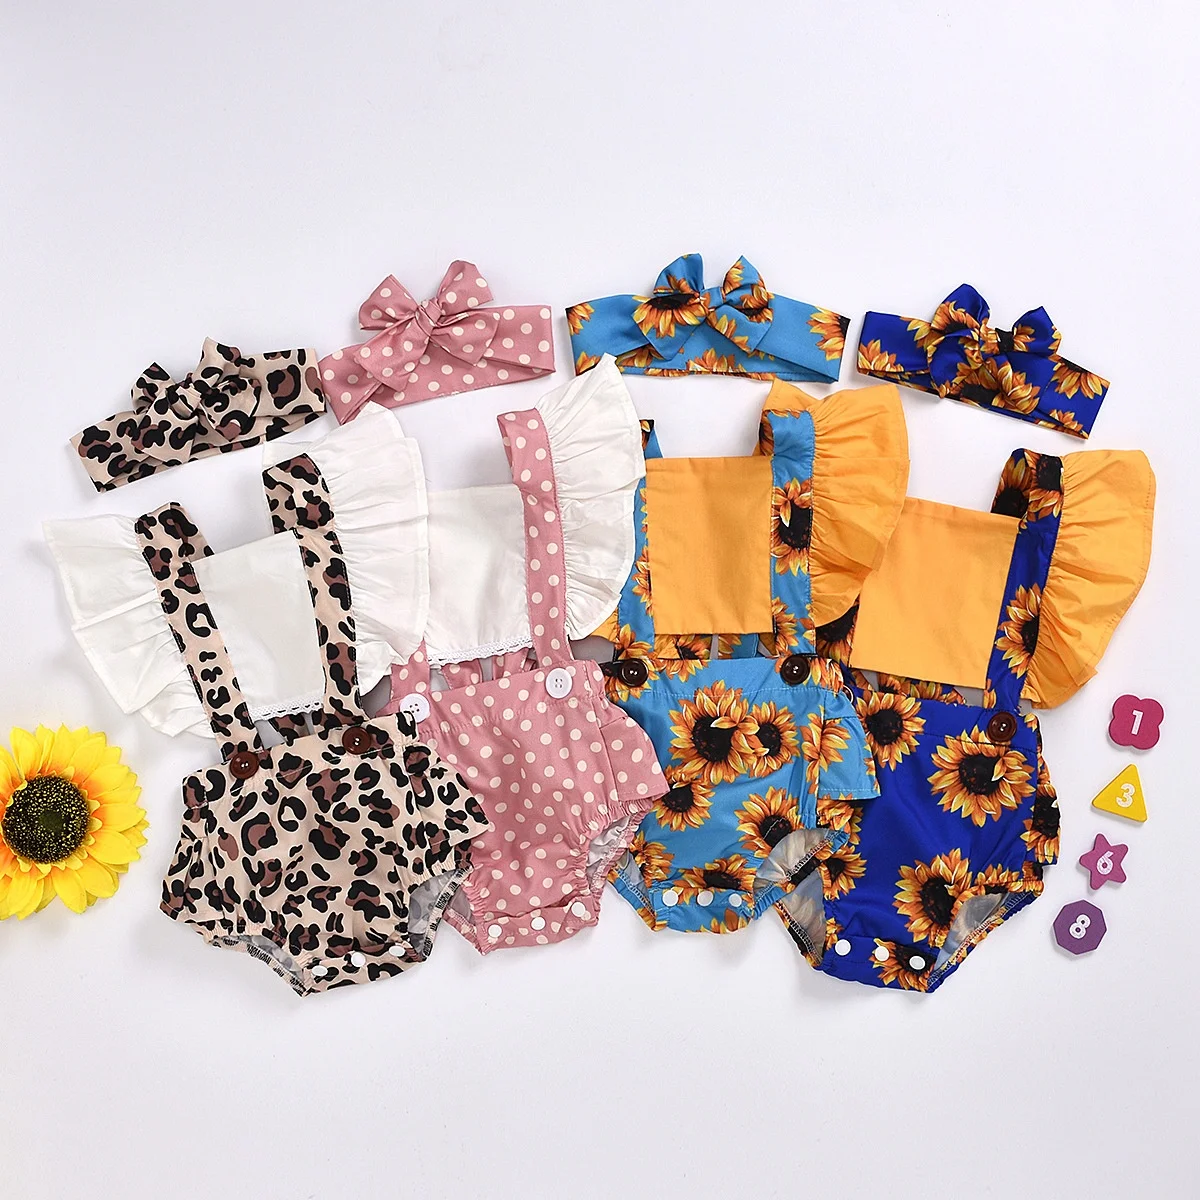 

New 2020 Summer Newborn Baby Girl Clothes Sunflower Sleeveless Romper Jumpsuit+Headband Outfits, Blue&white&black&red&gray